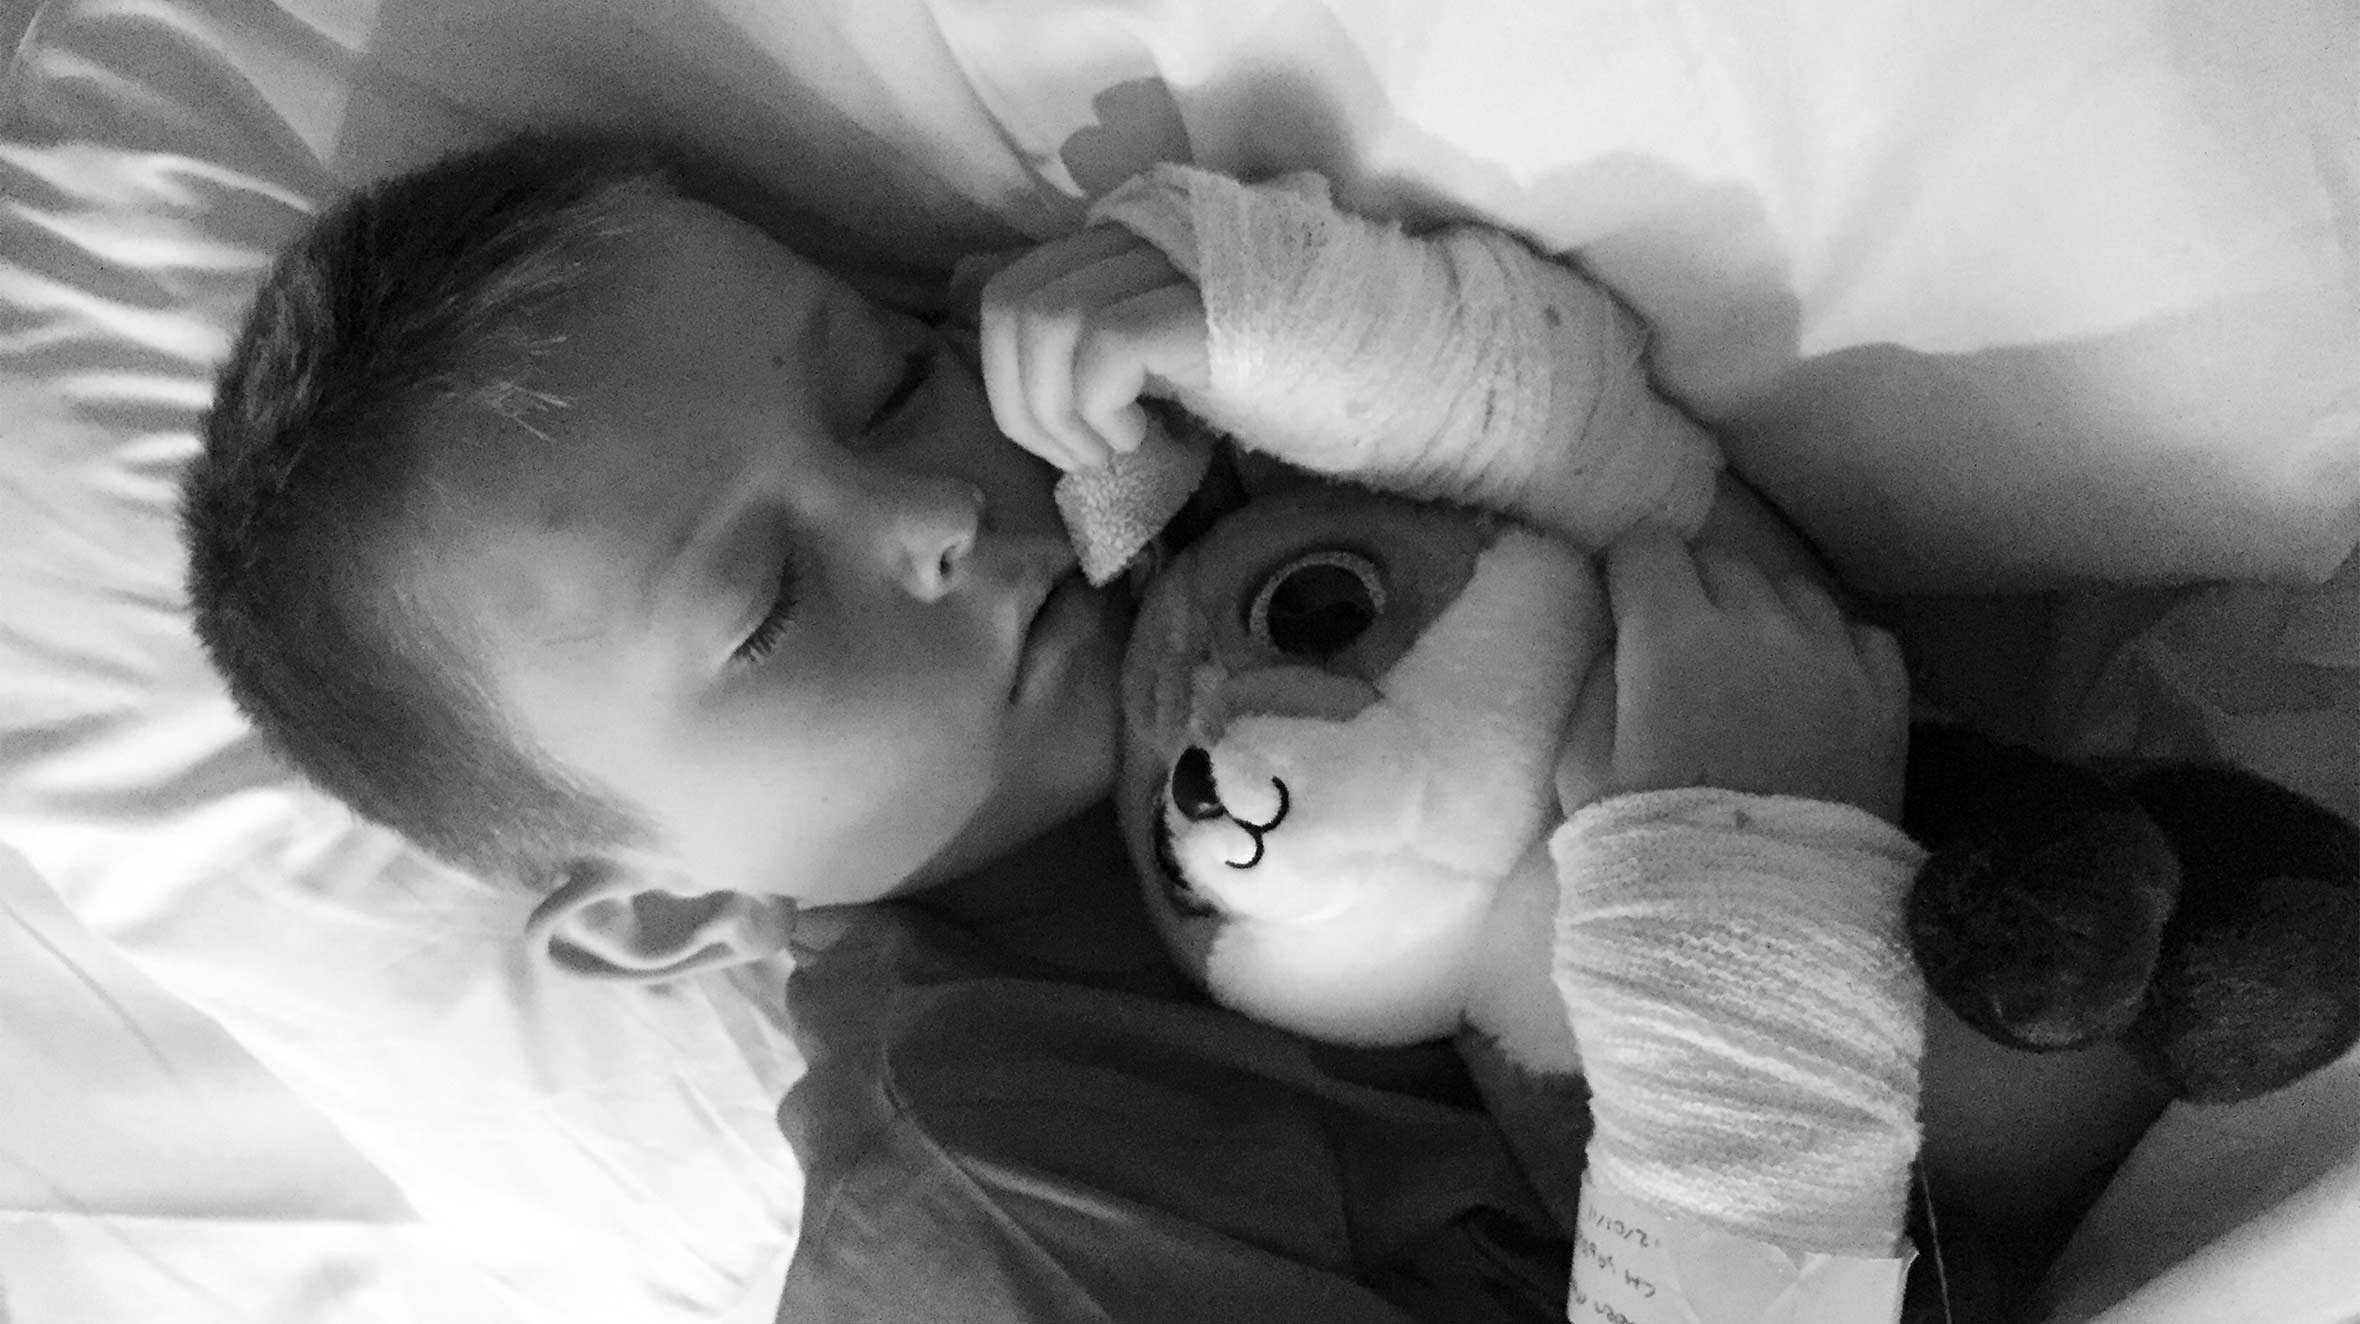 Black and white image of Caden sleeping in hospital while holding a cuddly toy